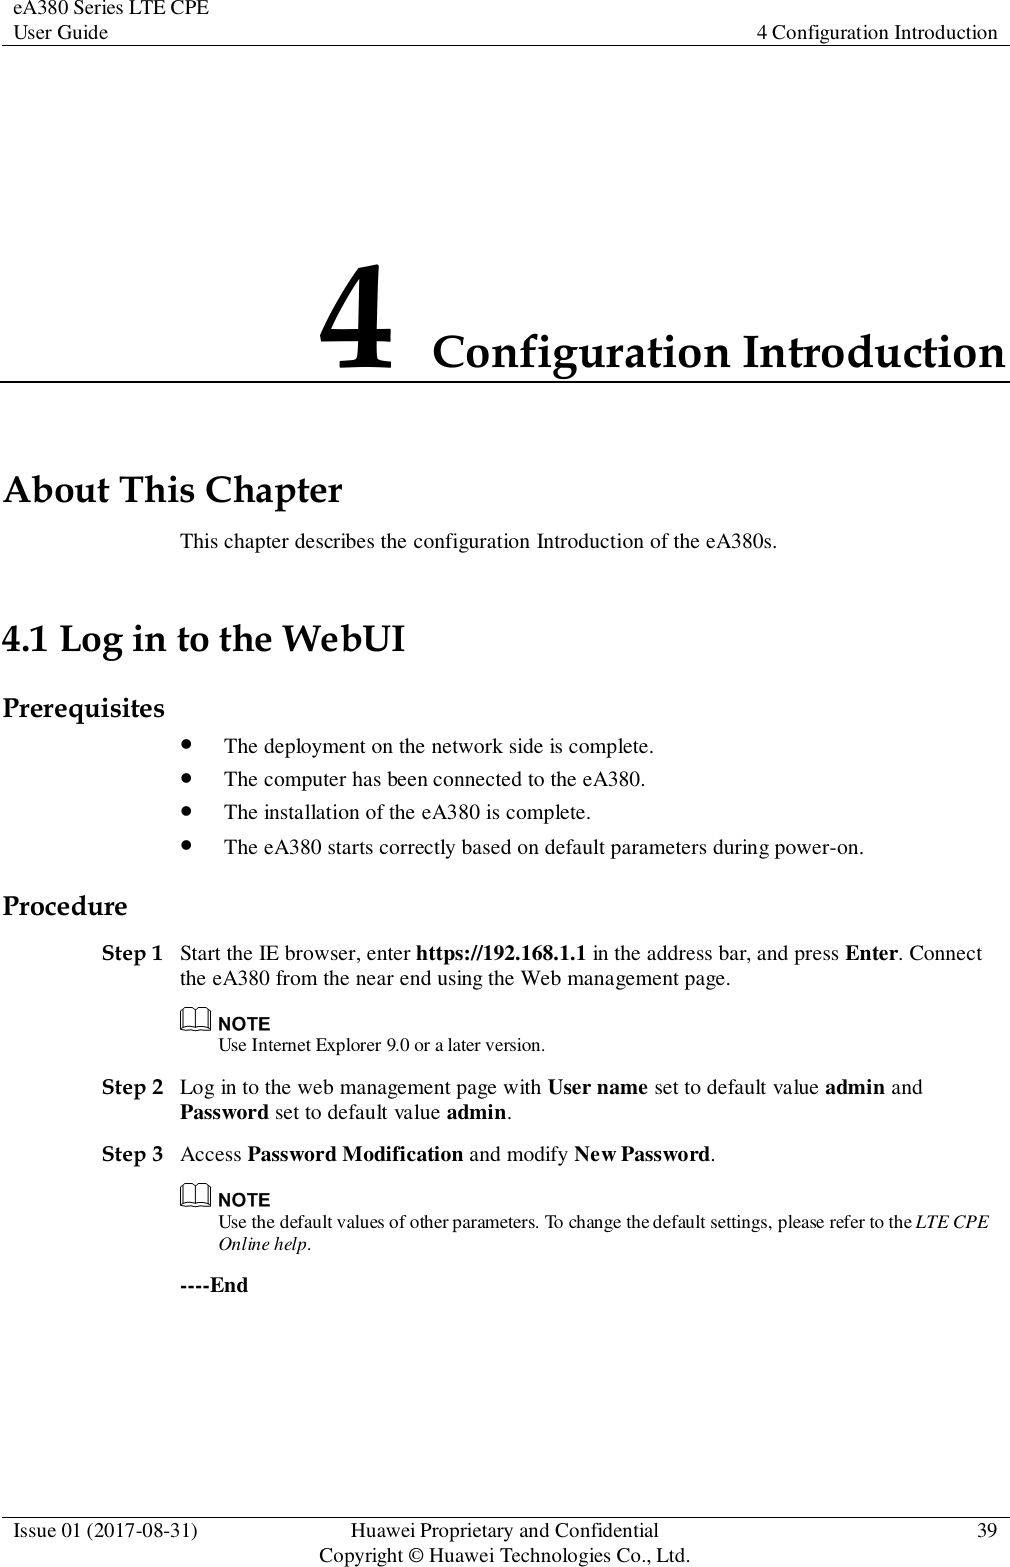 eA380 Series LTE CPE User Guide 4 Configuration Introduction  Issue 01 (2017-08-31) Huawei Proprietary and Confidential                                     Copyright © Huawei Technologies Co., Ltd. 39  4 Configuration Introduction About This Chapter This chapter describes the configuration Introduction of the eA380s. 4.1 Log in to the WebUI Prerequisites  The deployment on the network side is complete.  The computer has been connected to the eA380.  The installation of the eA380 is complete.  The eA380 starts correctly based on default parameters during power-on. Procedure Step 1 Start the IE browser, enter https://192.168.1.1 in the address bar, and press Enter. Connect the eA380 from the near end using the Web management page.  Use Internet Explorer 9.0 or a later version. Step 2 Log in to the web management page with User name set to default value admin and Password set to default value admin. Step 3 Access Password Modification and modify New Password.  Use the default values of other parameters. To change the default settings, please refer to the LTE CPE Online help.   ----End 